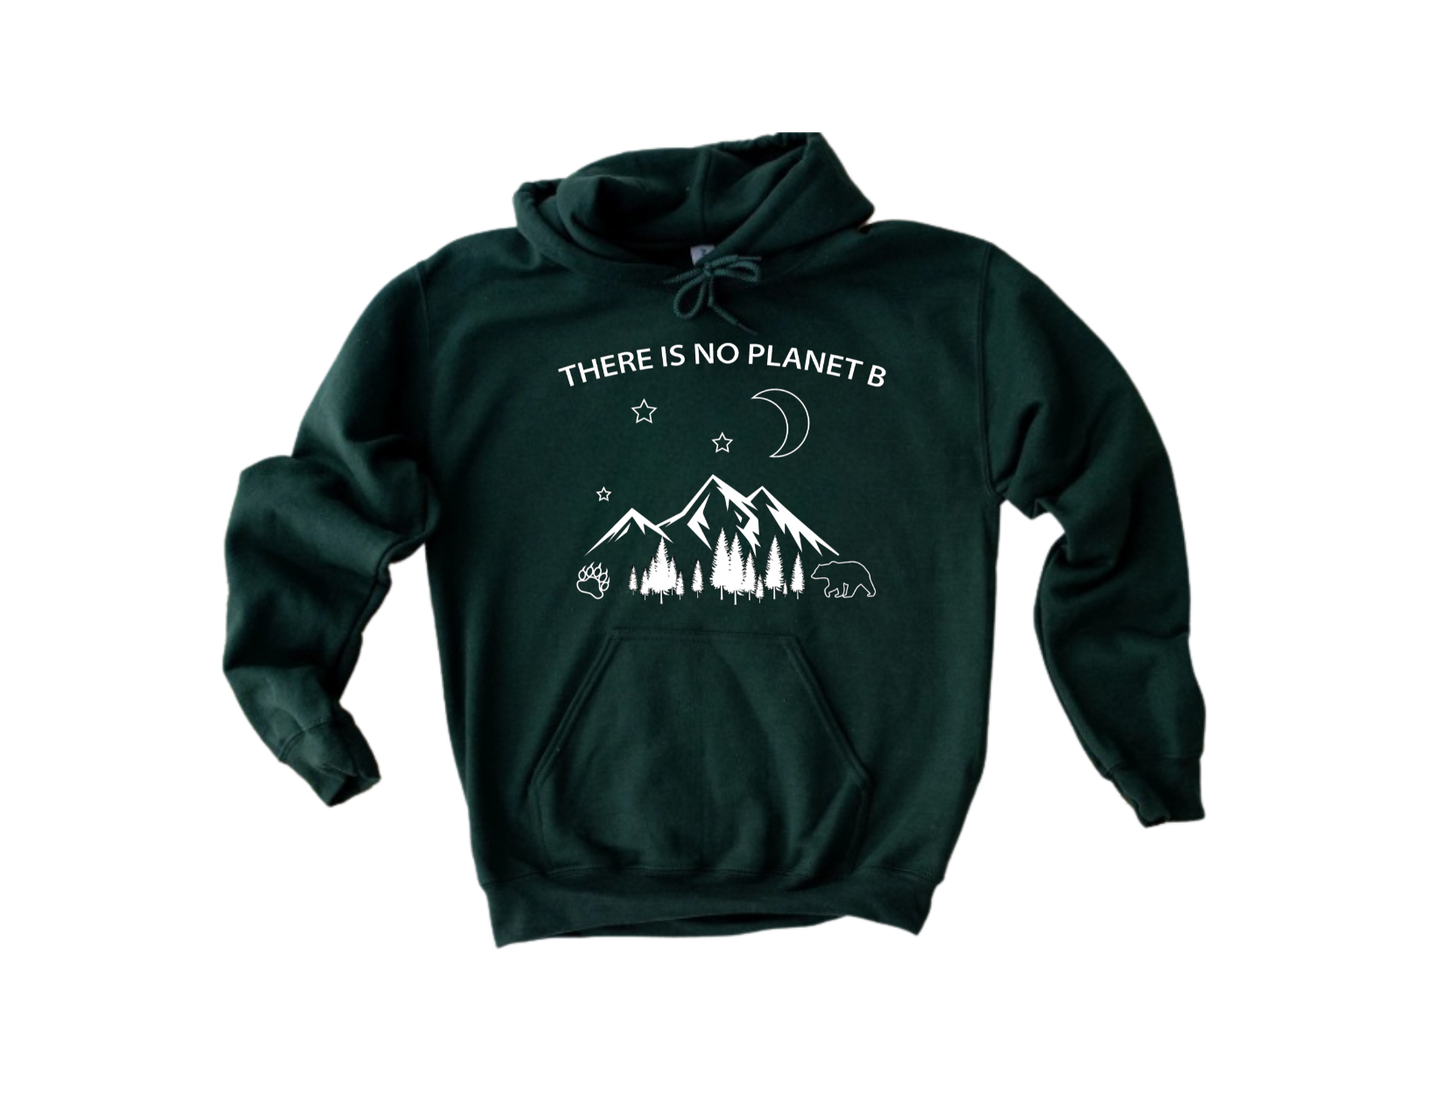 There Is No Planet B Hoodie